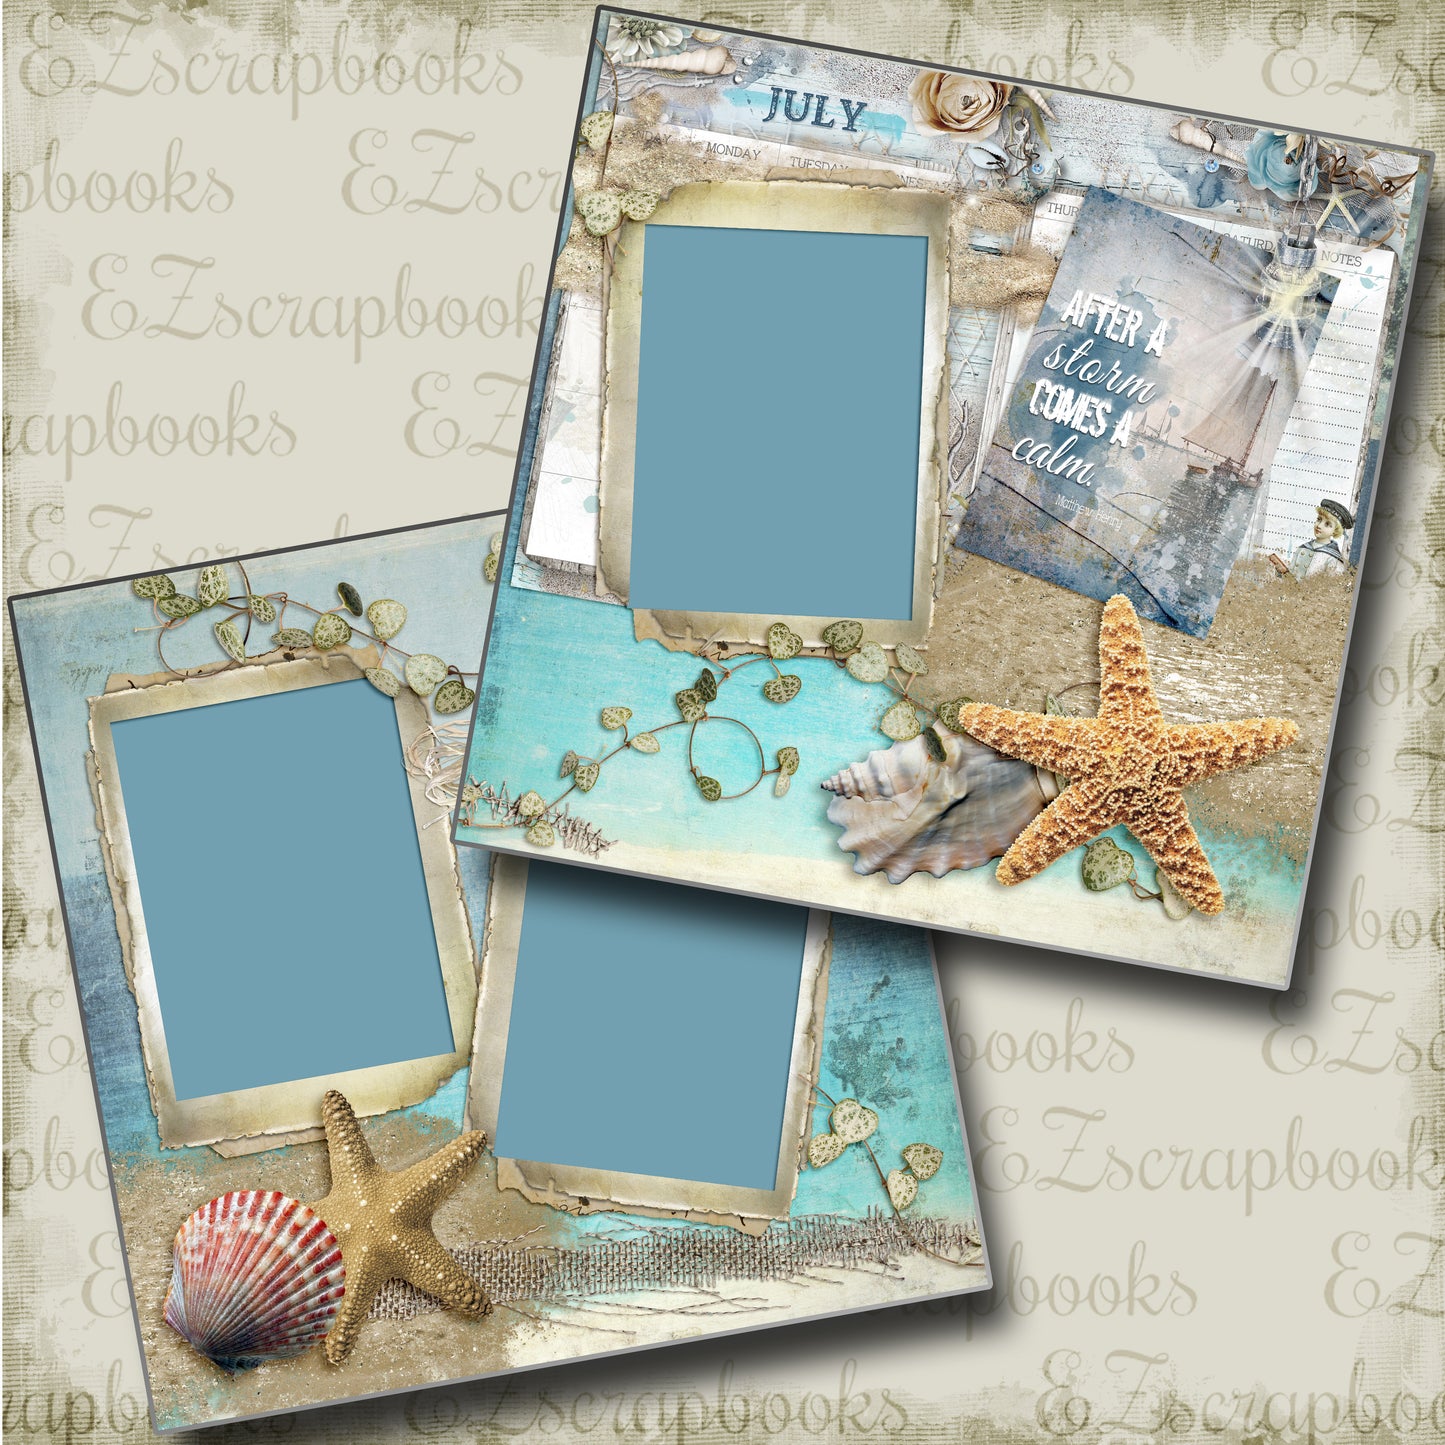 Shabby Calendar Months of the Year Pack - 1431 - EZscrapbooks Scrapbook Layouts Months of the Year